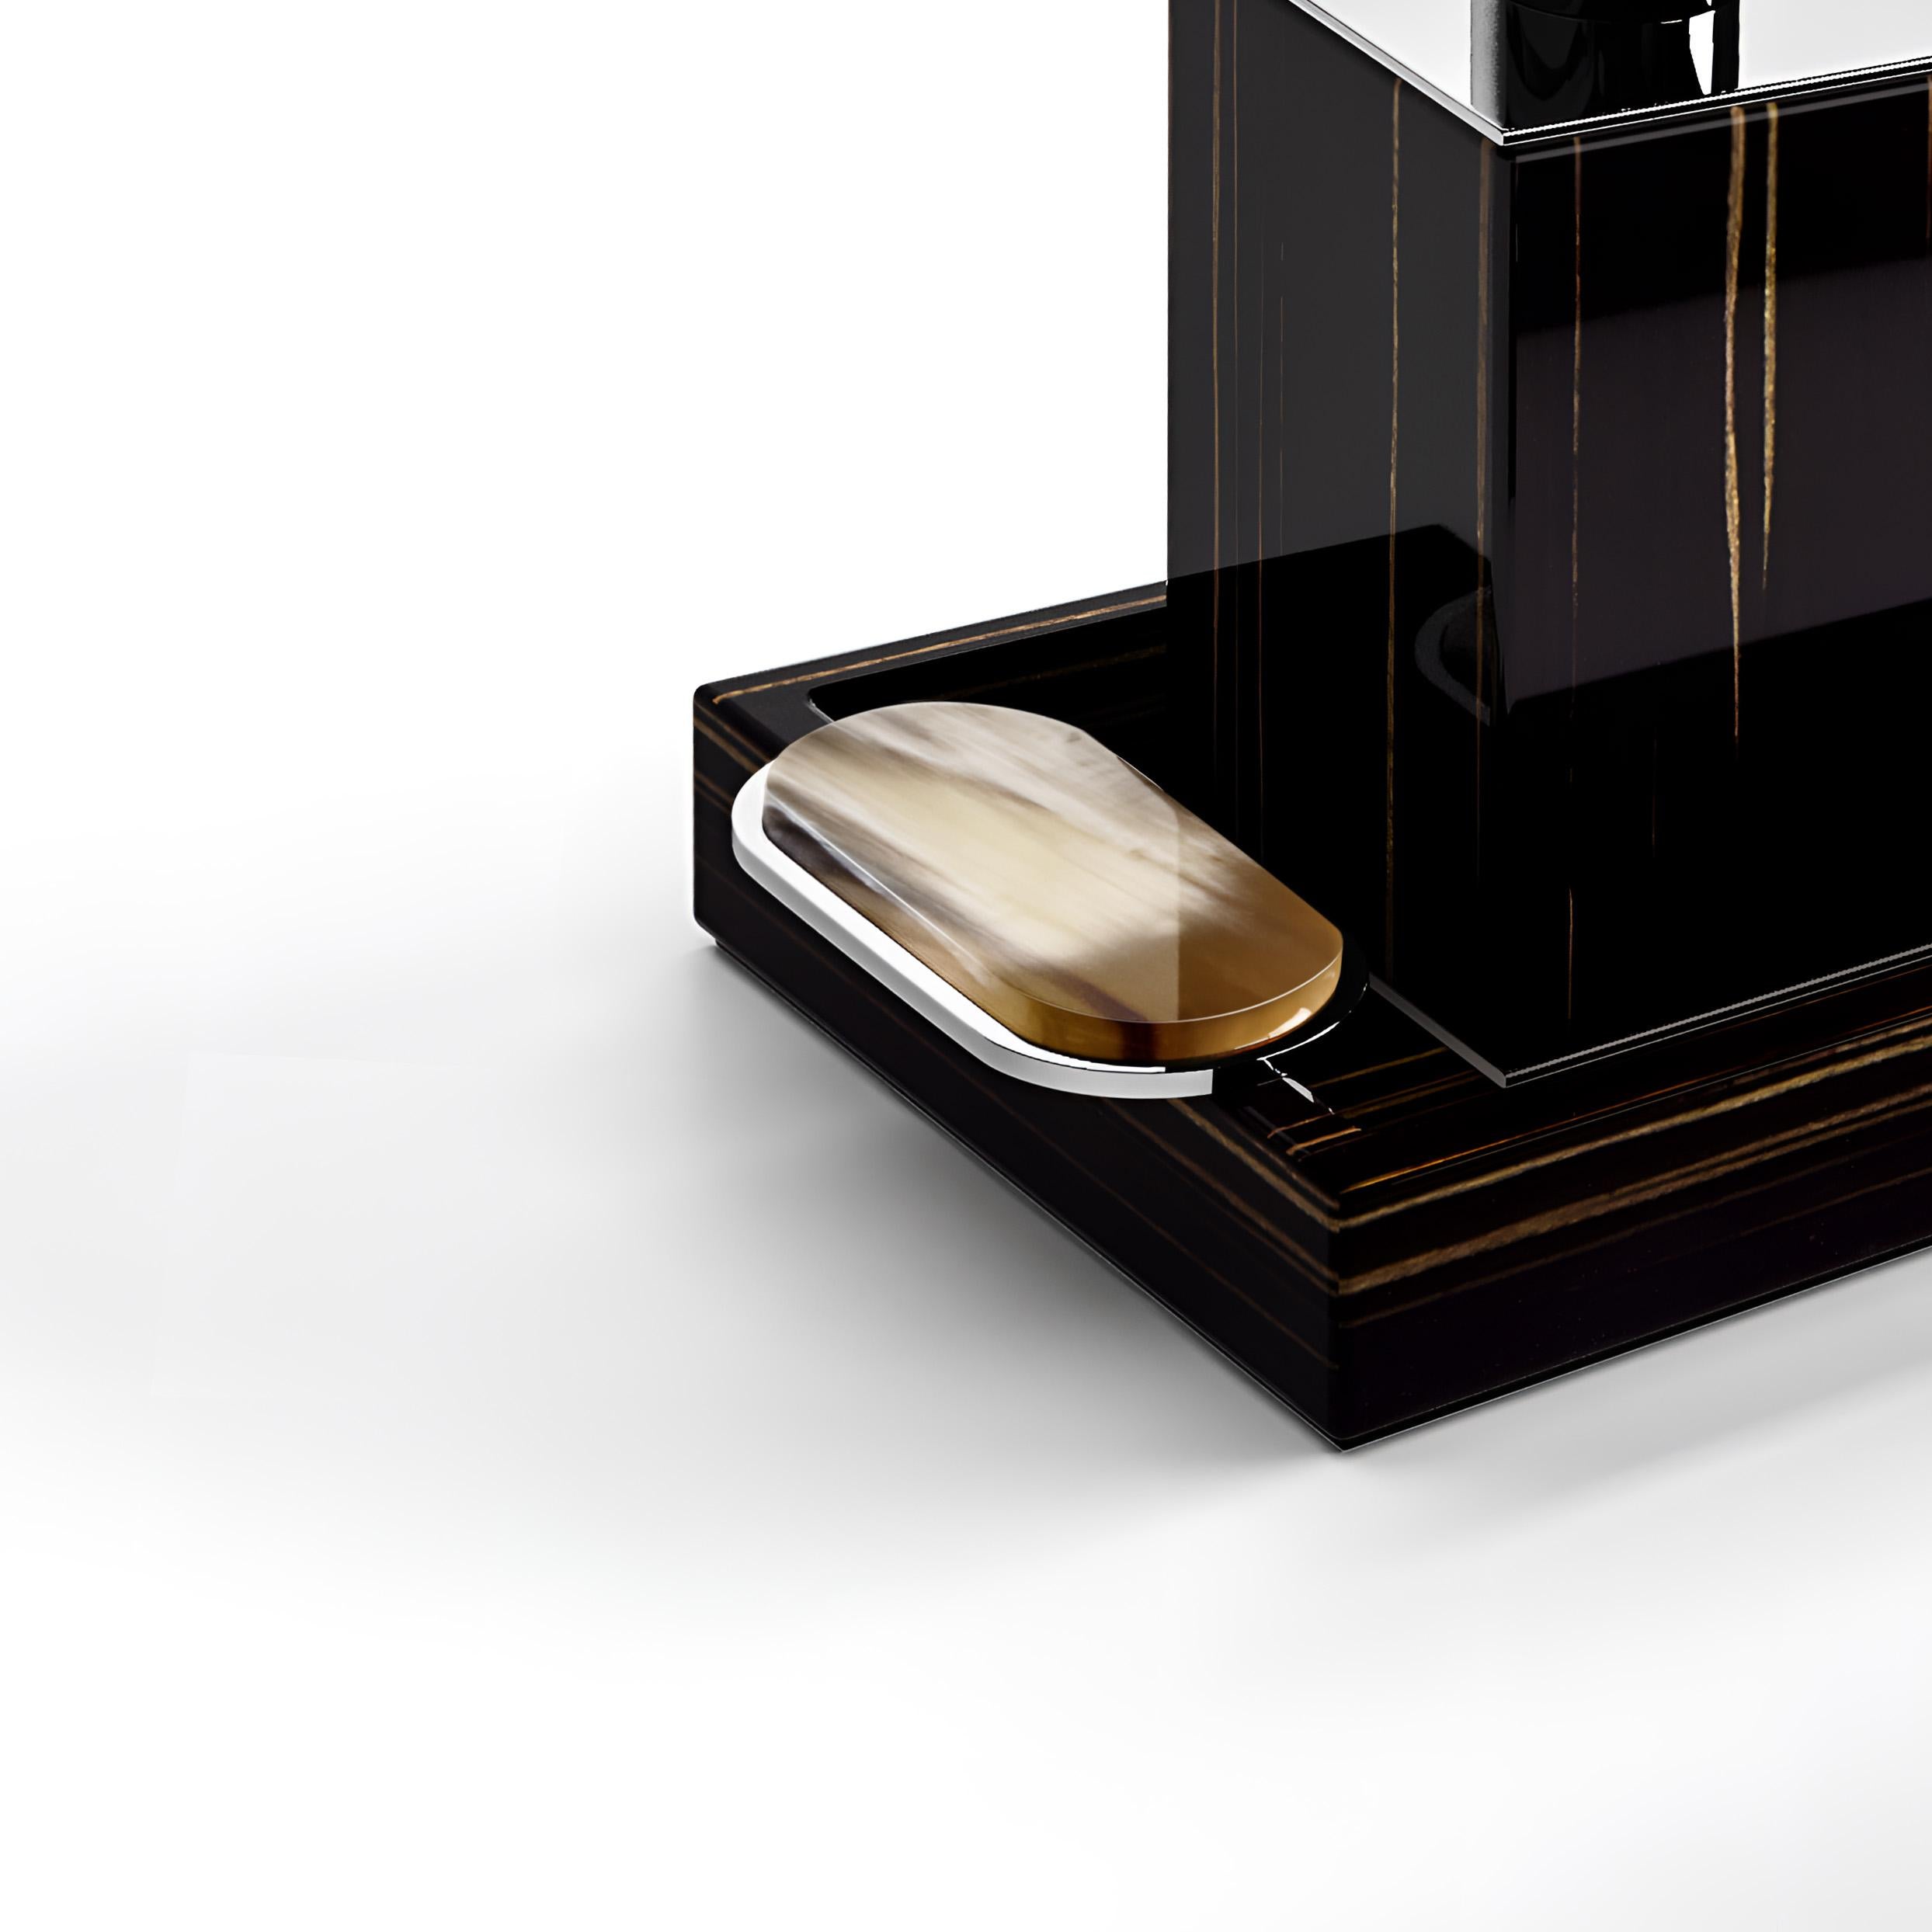 Blending contemporary flair with timeless materials, the Argentella bath set will add sophistication to any bathroom. Crafted from glossy ebony and chromed brass, the set comprises a soap dispenser and a toothbrush holder arranged on a practical